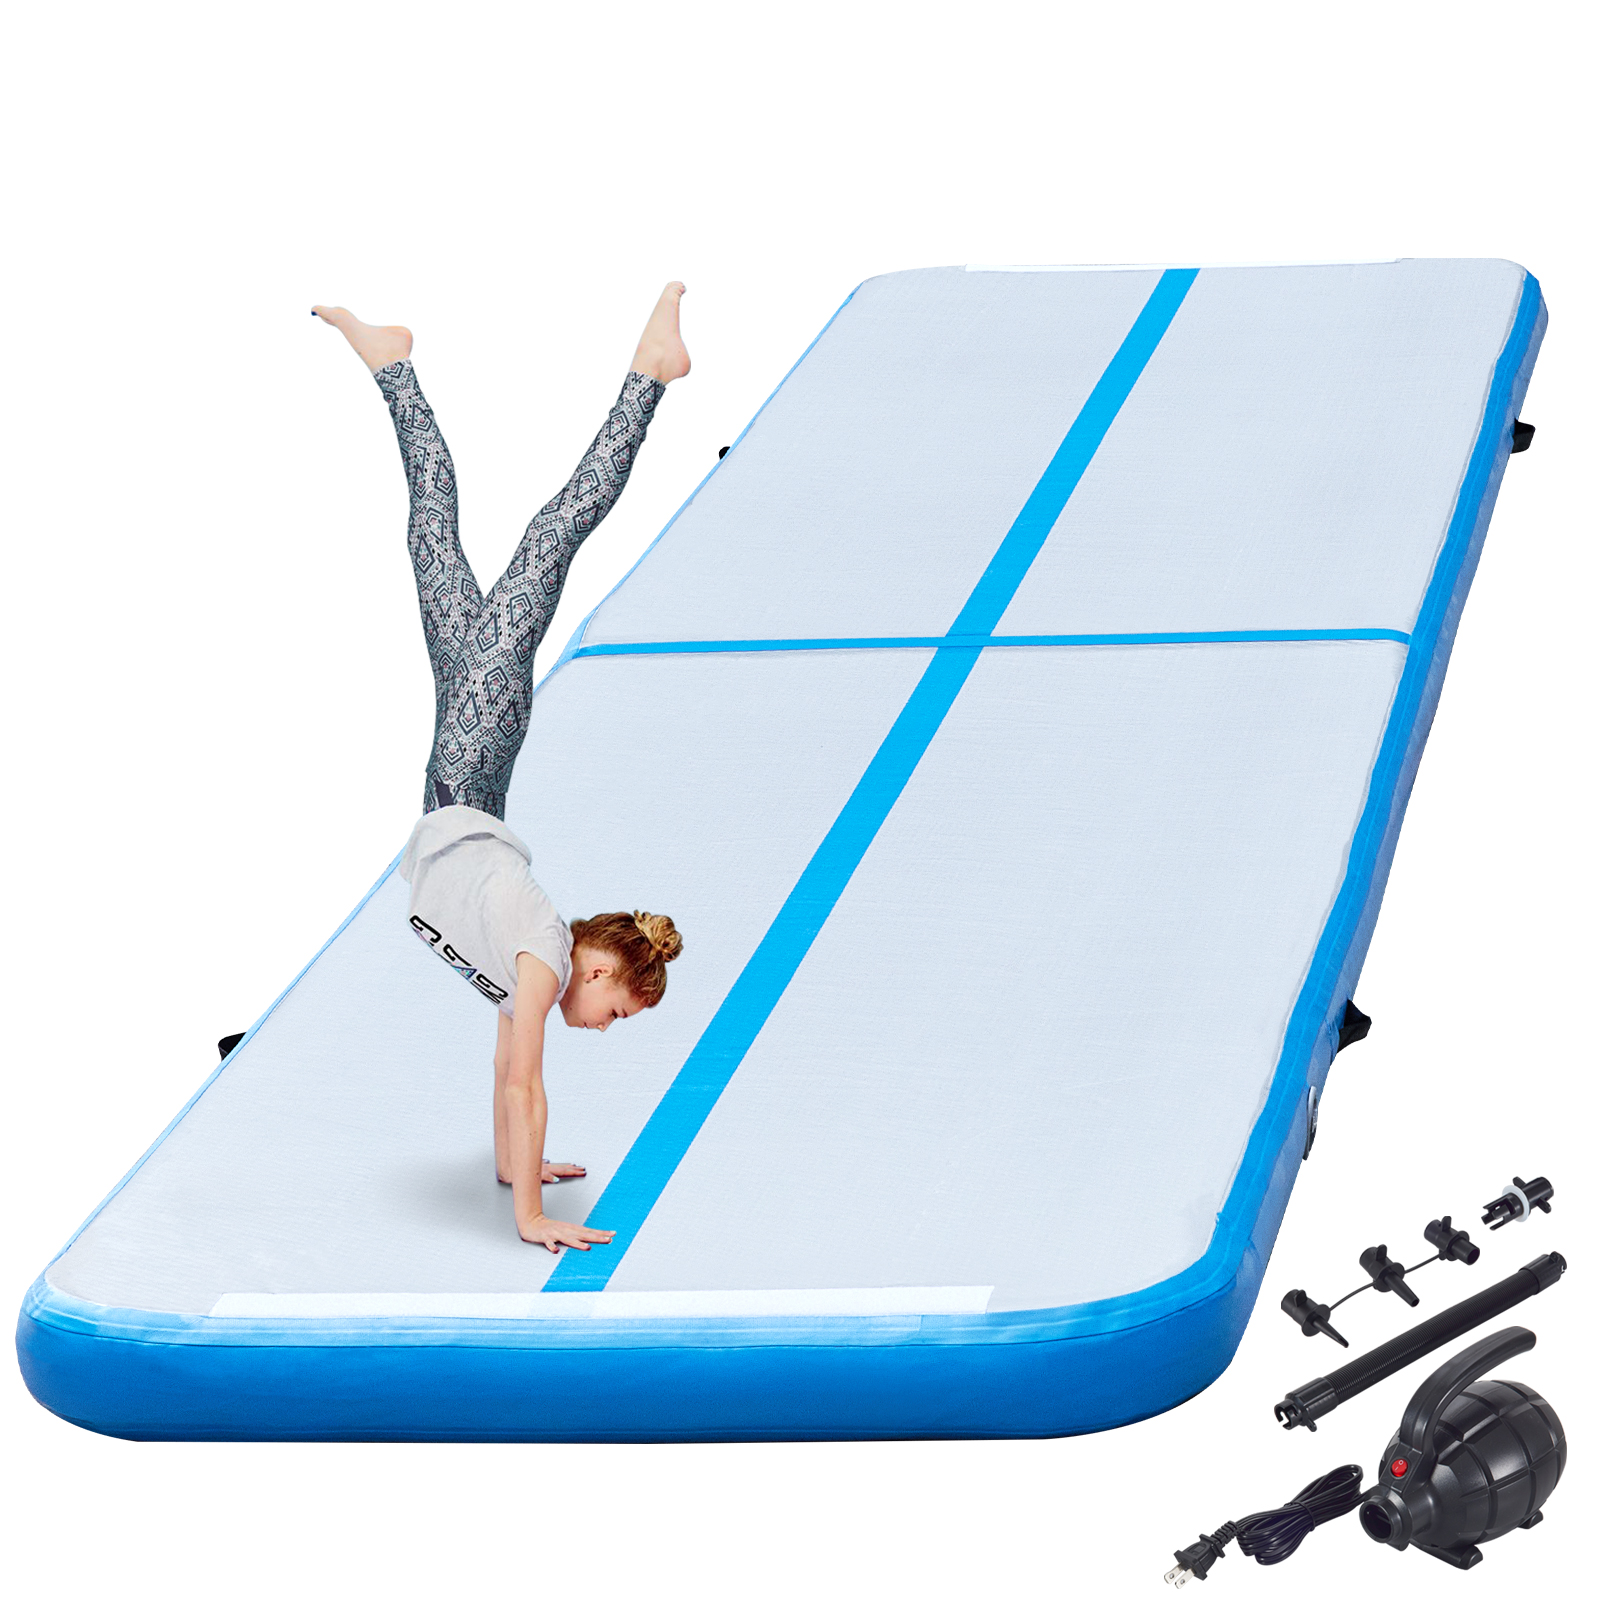 The Best Gymnastics Mats for Home Practice, AirTrack Blog